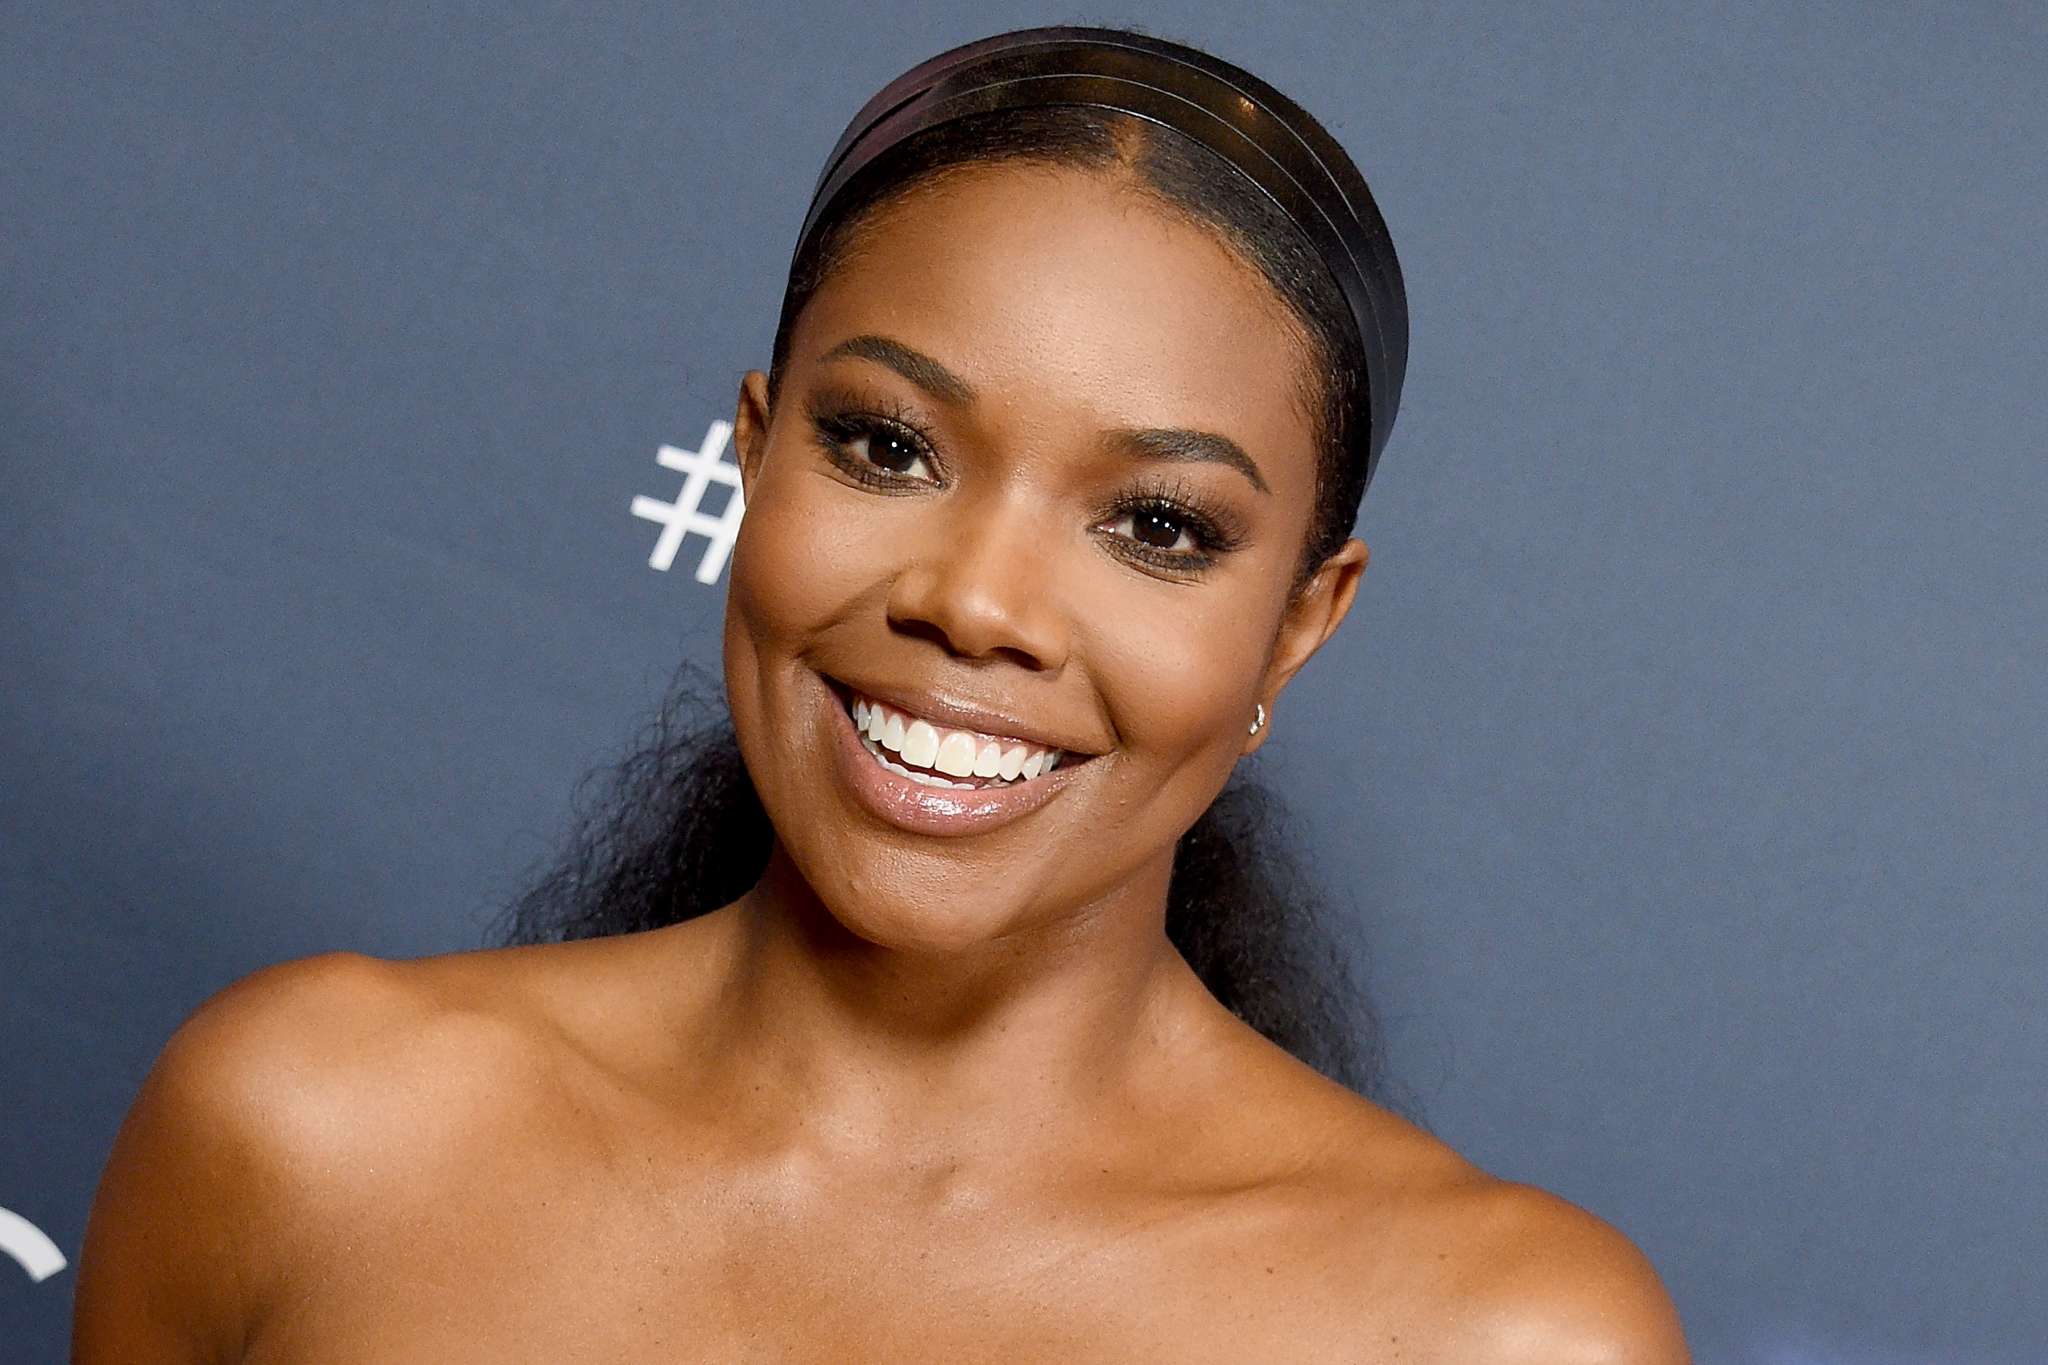 Gabrielle Union Makes Fans Emotional With These Photos Featuring Her Mother